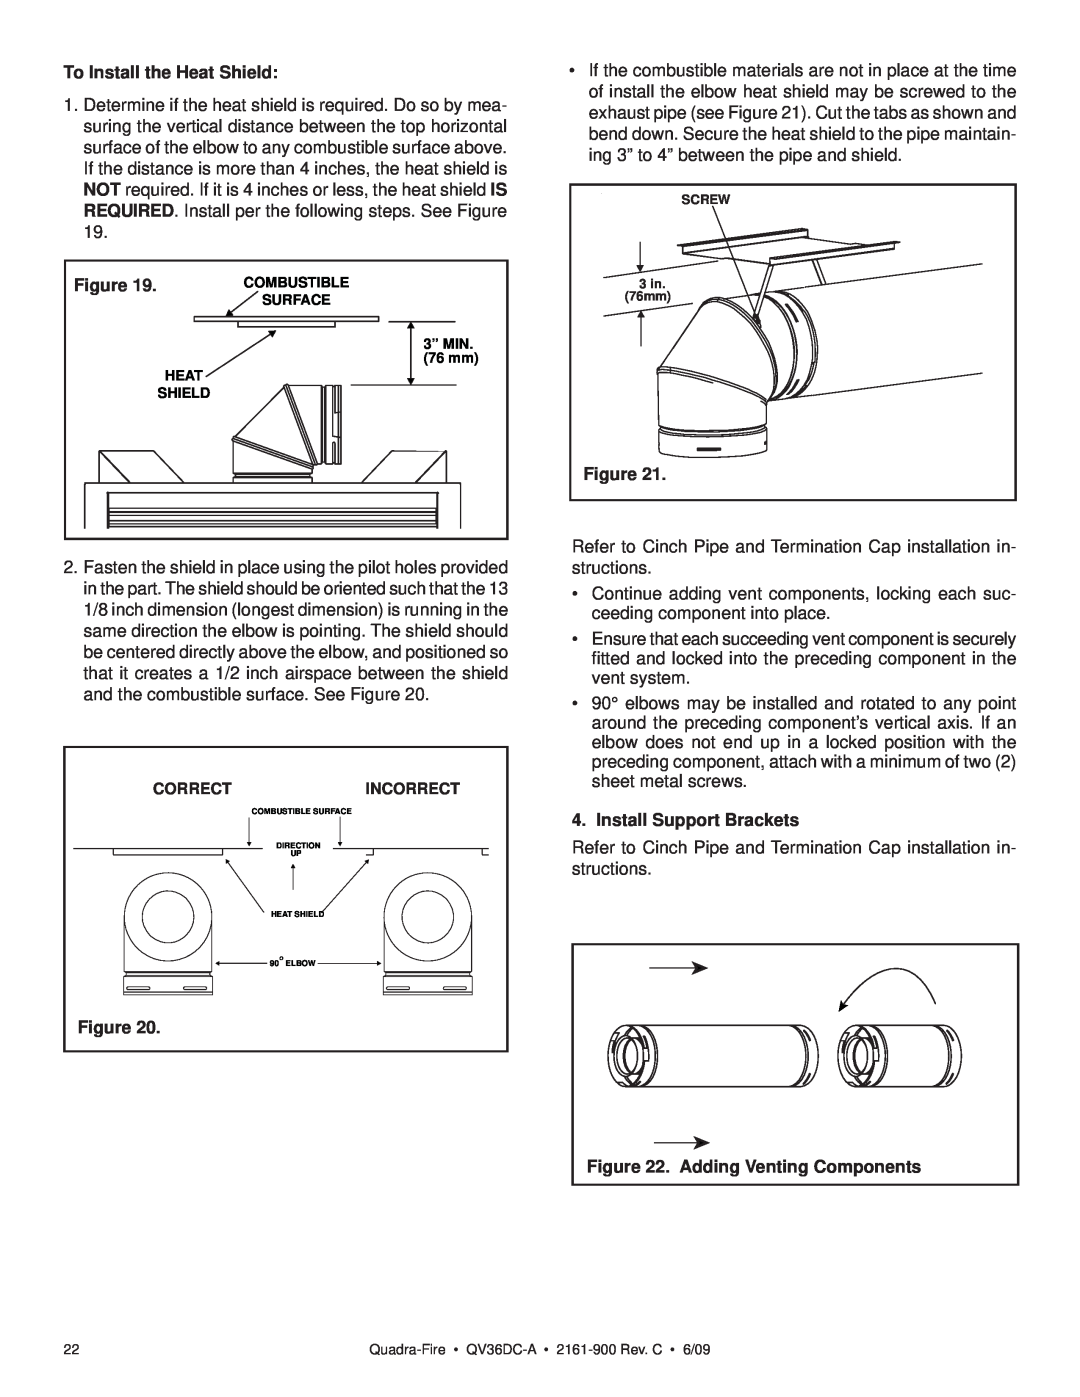 Quadra-Fire QV36DC-A owner manual To Install the Heat Shield, Install Support Brackets, Adding Venting Components 